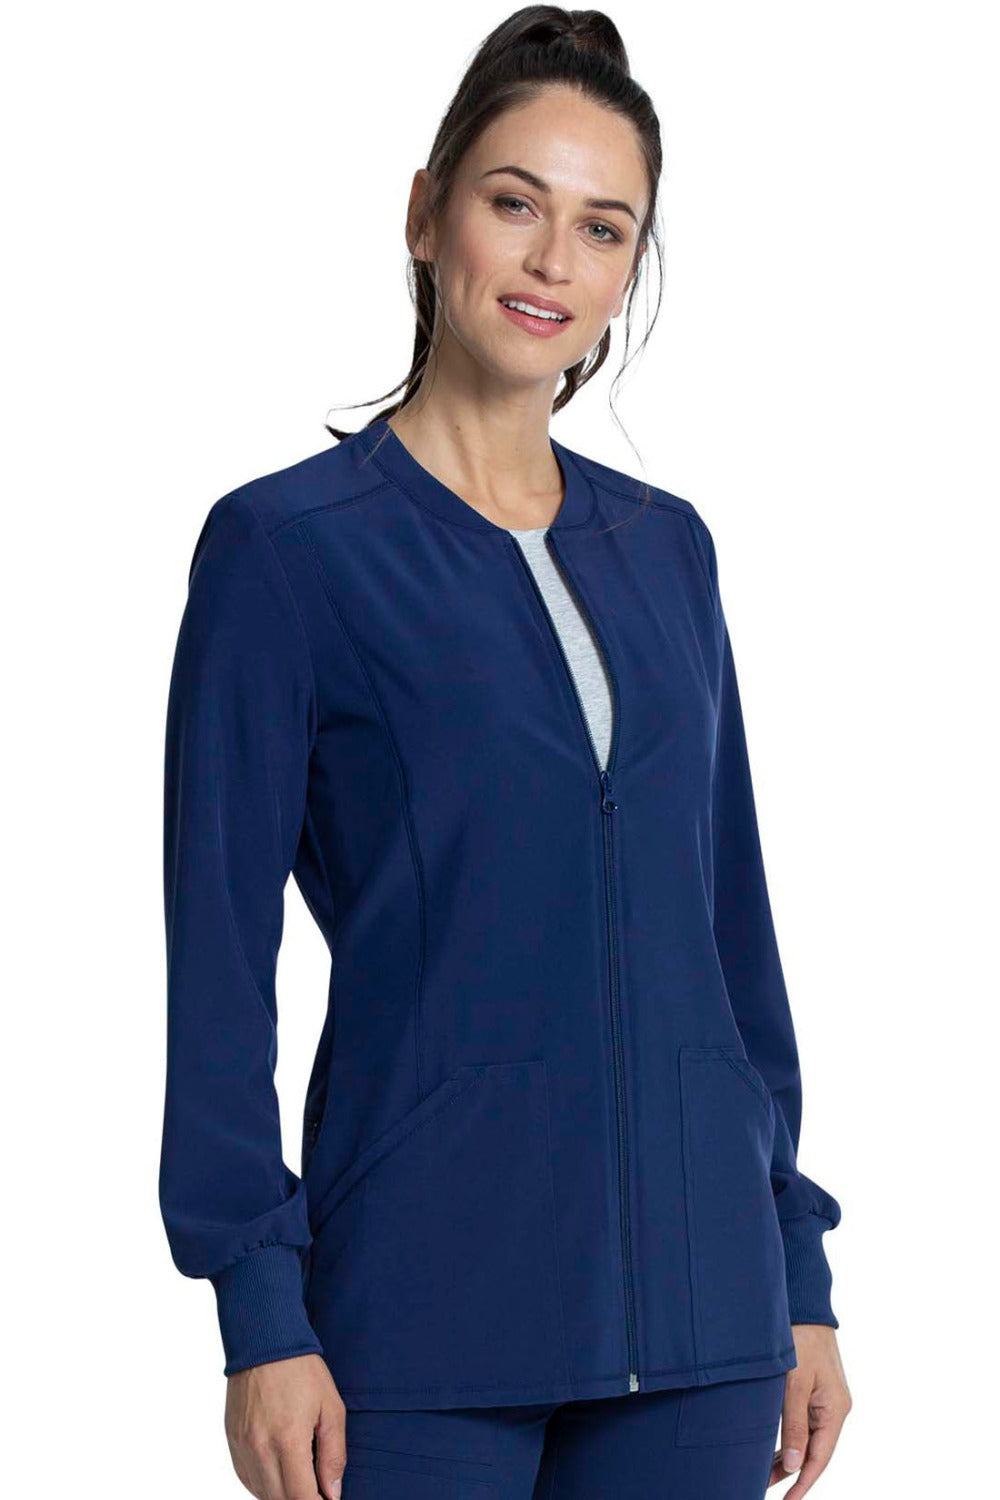 Cherokee Allura Round Neck Zipper Jacket in Navy at Parker's Clothing and Shoes.